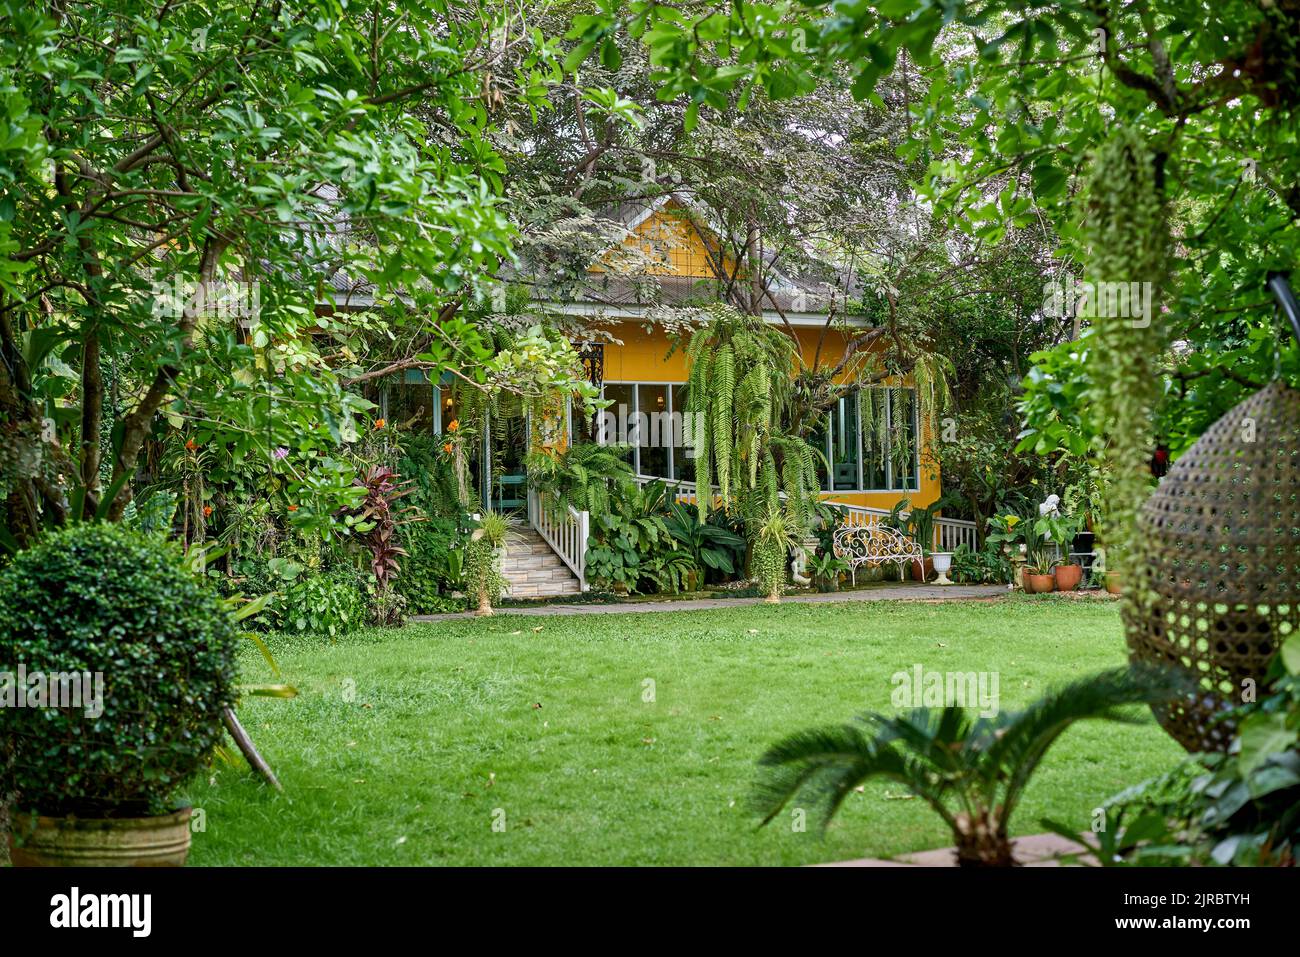 A beautiful cafe surrounded by lush green trees and plants, in Thailand. Stock Photo